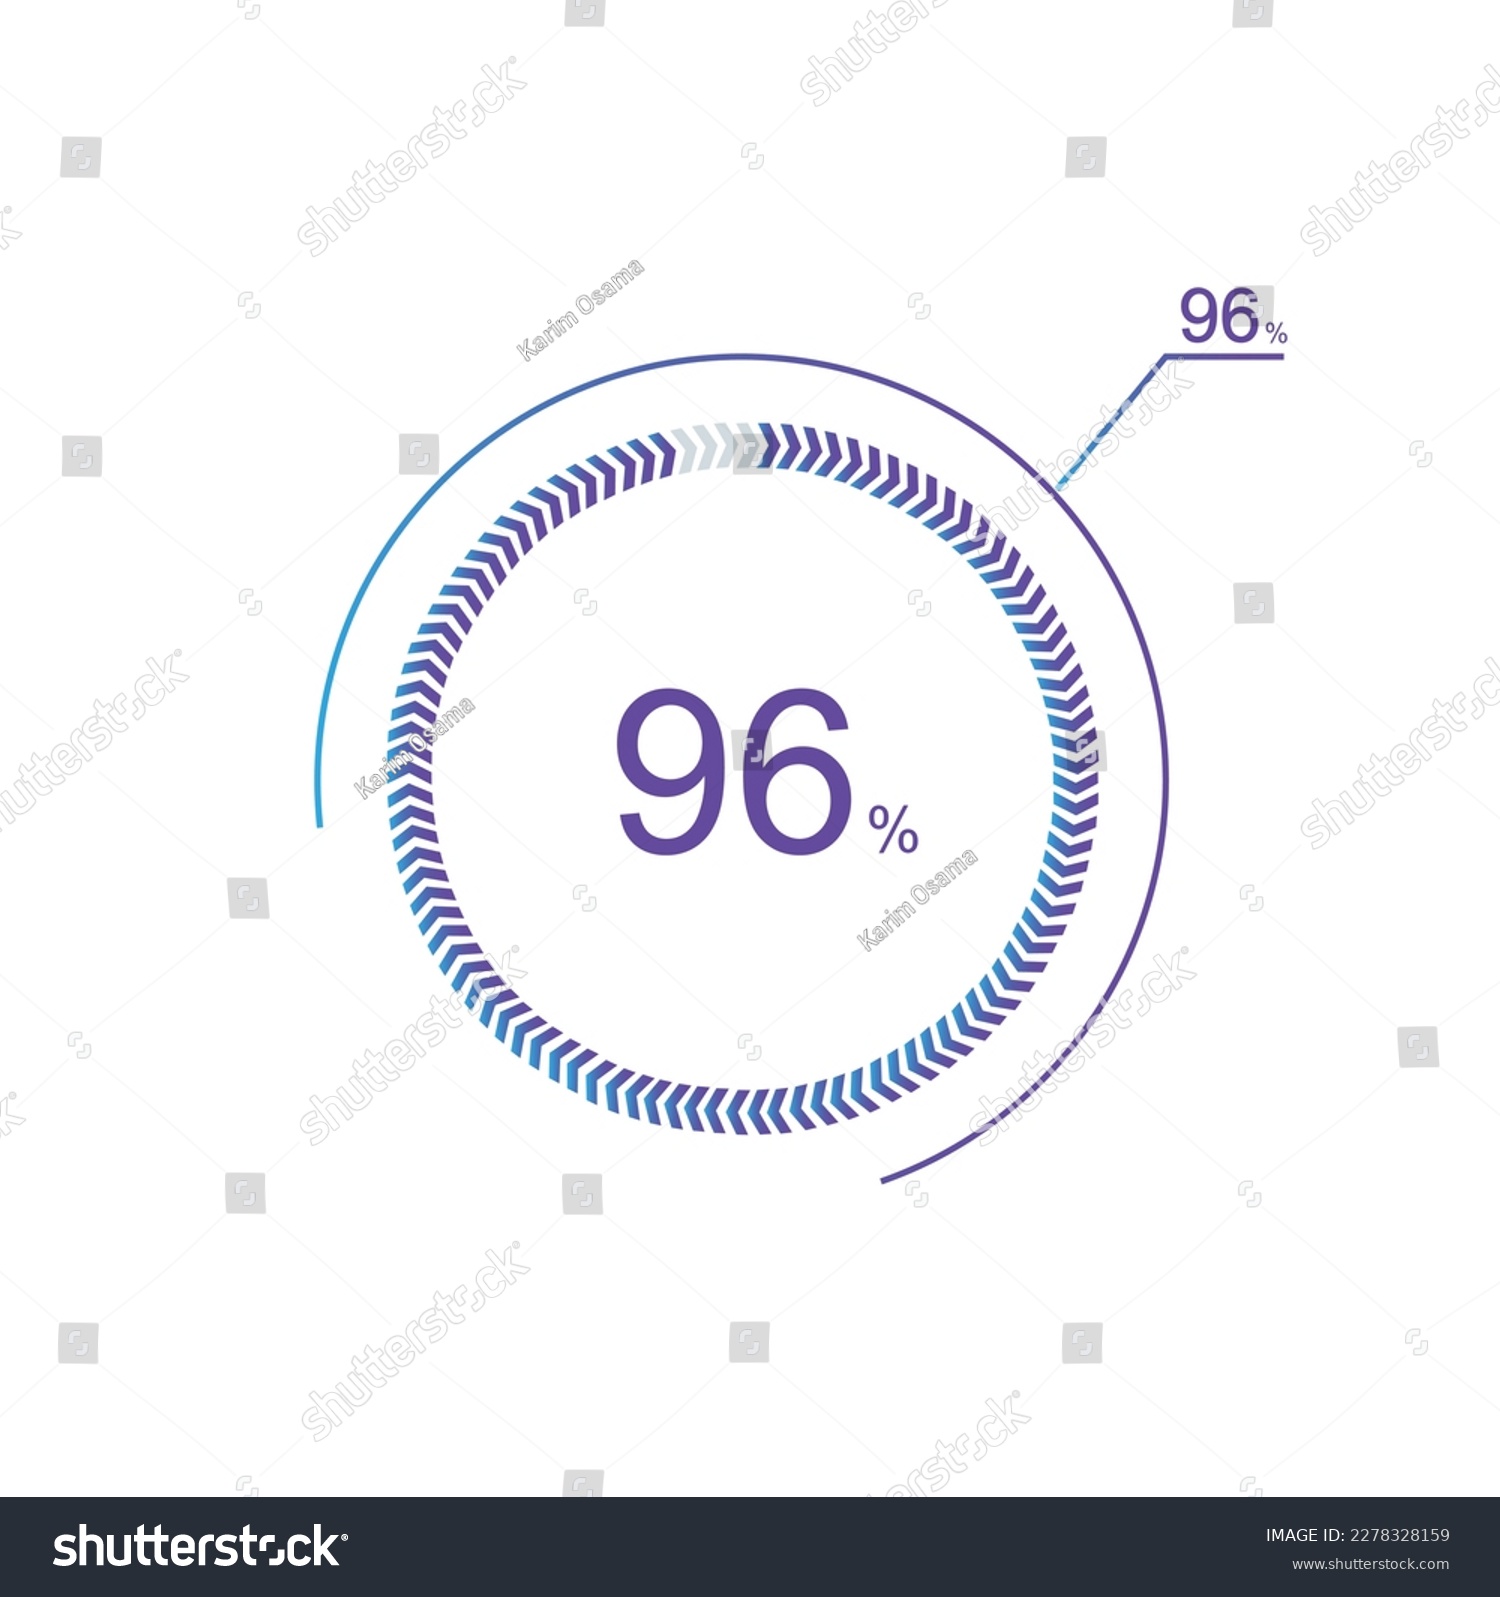 SVG of 96% percentage infographic circle icons, 96 percents pie chart infographic elements for Illustration, business, web design. svg